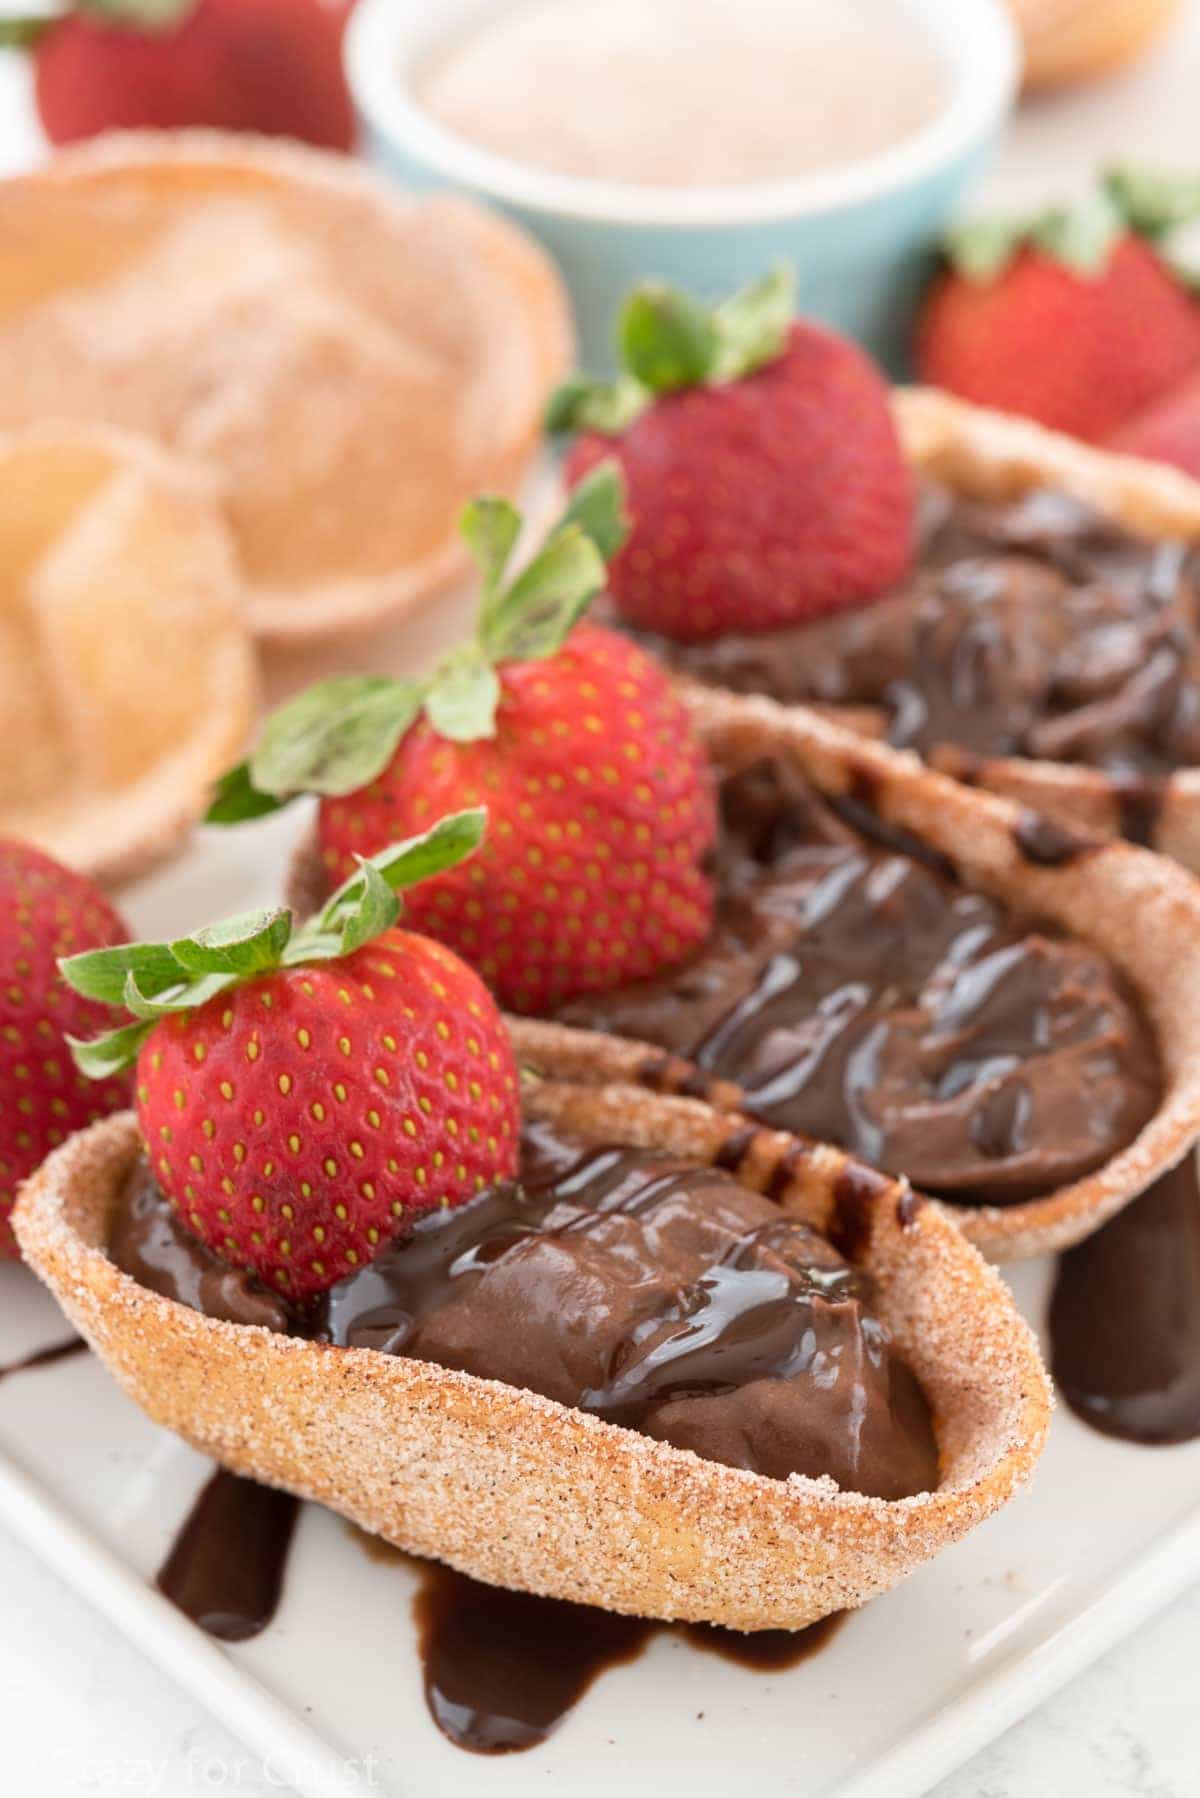 Chocolate Churro Pies topped with fresh strawberries